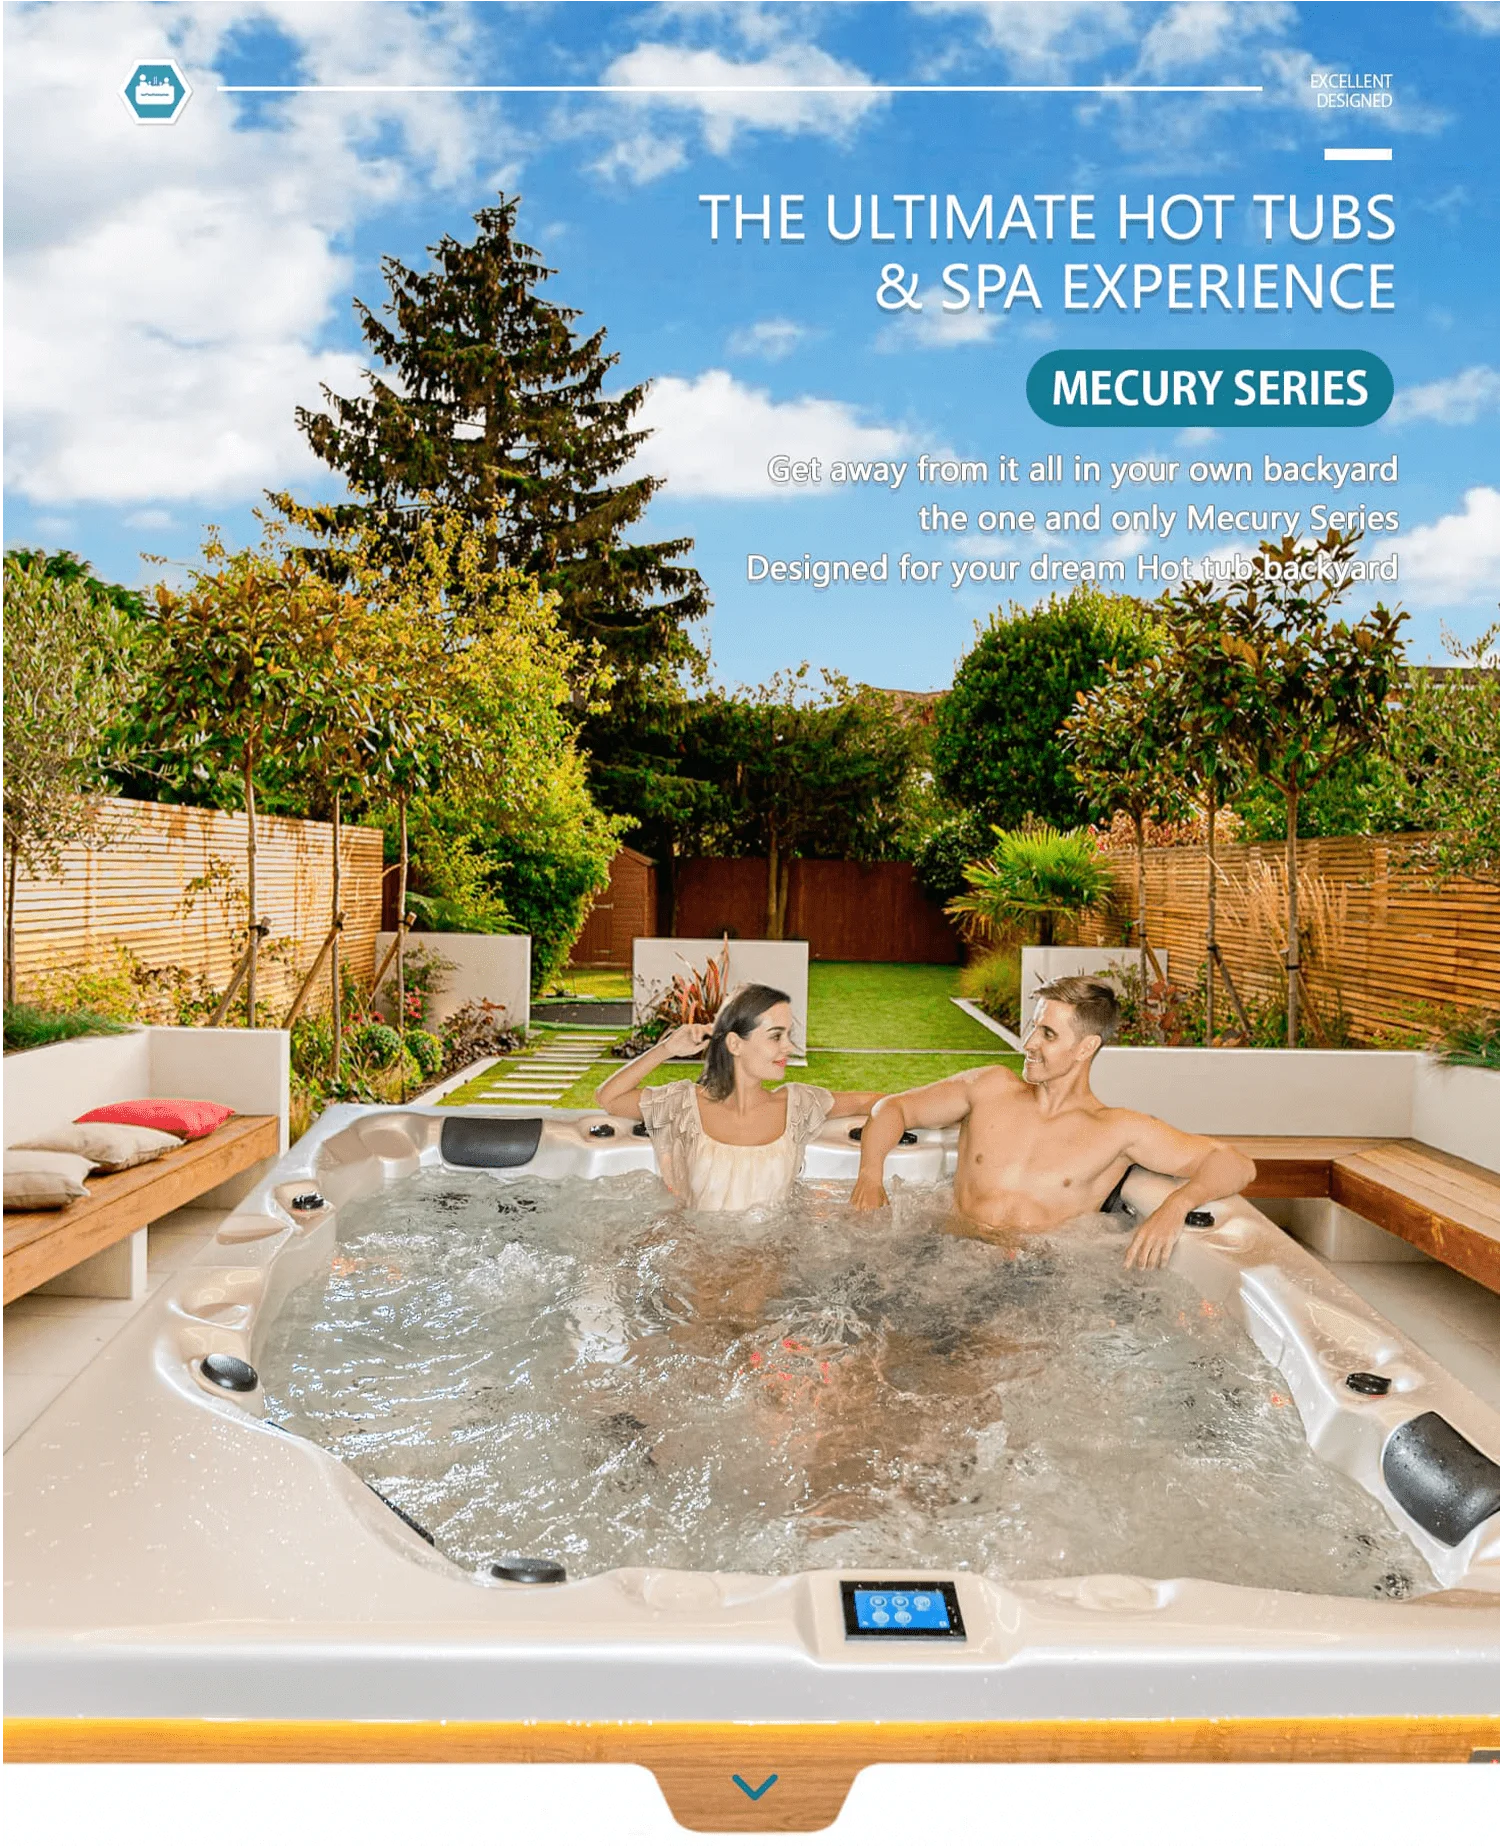 Luxury Hot Tub Outdoor 5 Person Whirlpool Hot Tub Party Spas And Hot ...